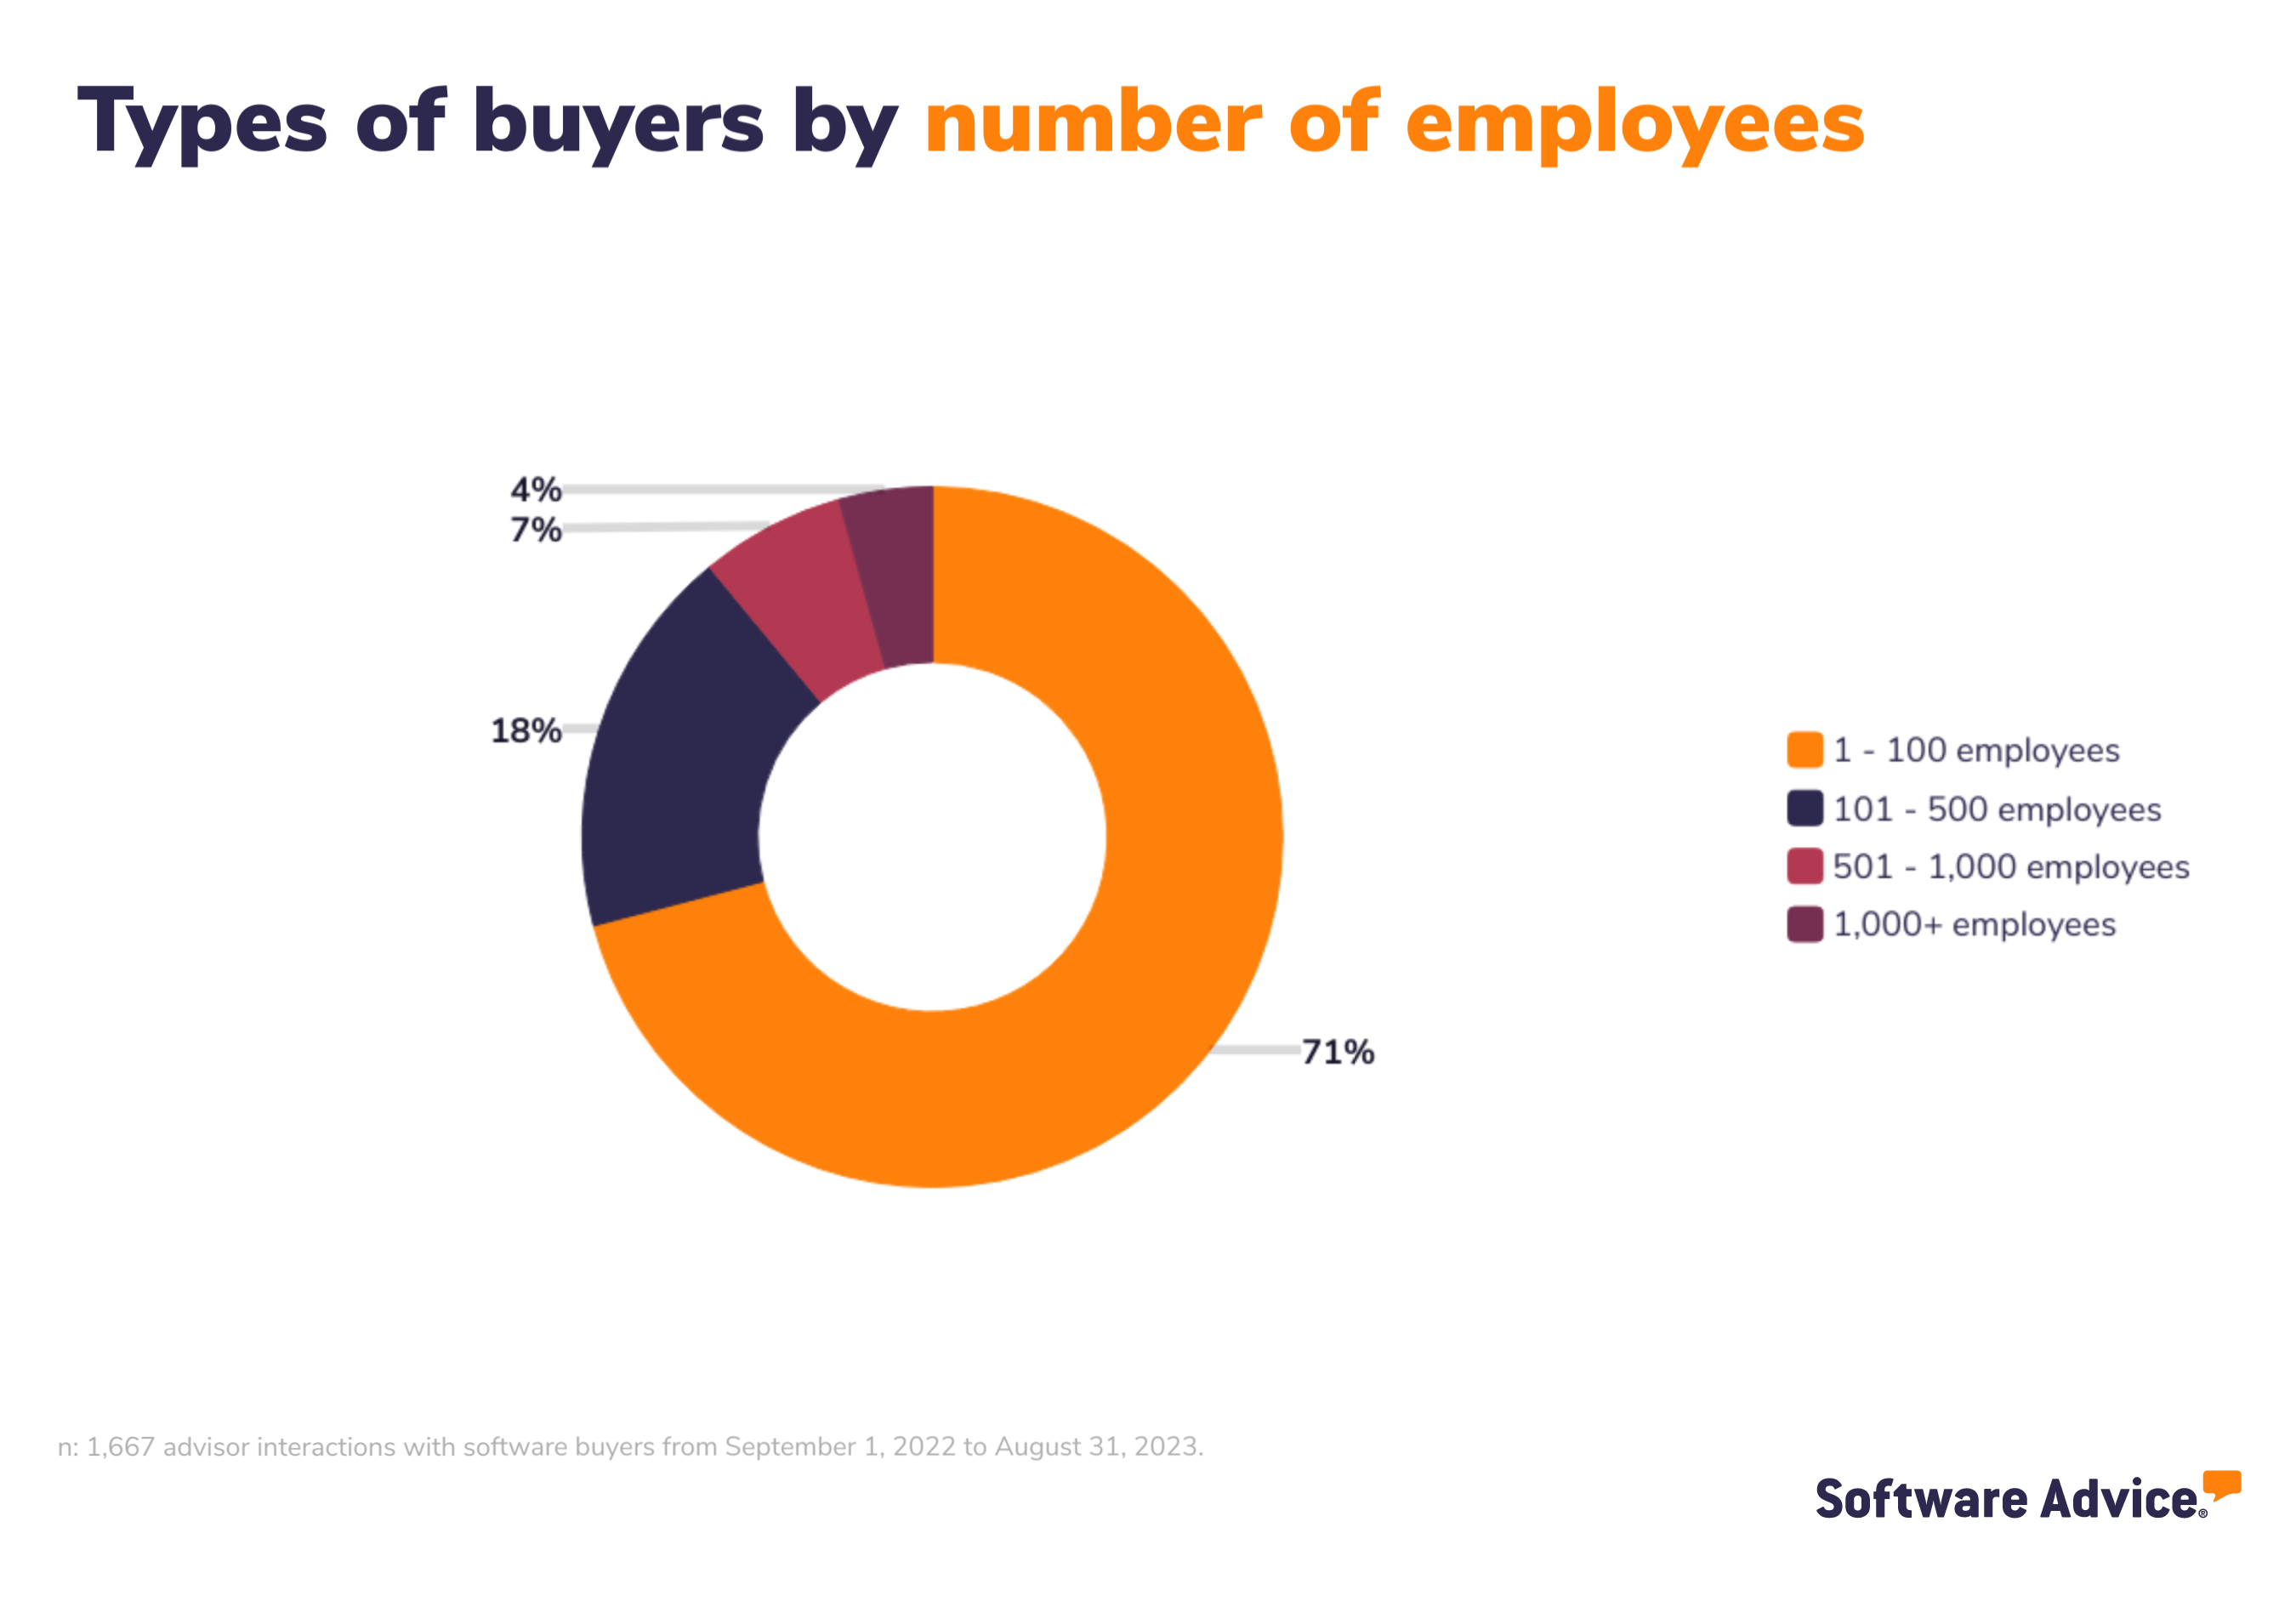 Types of buyers by number of employees